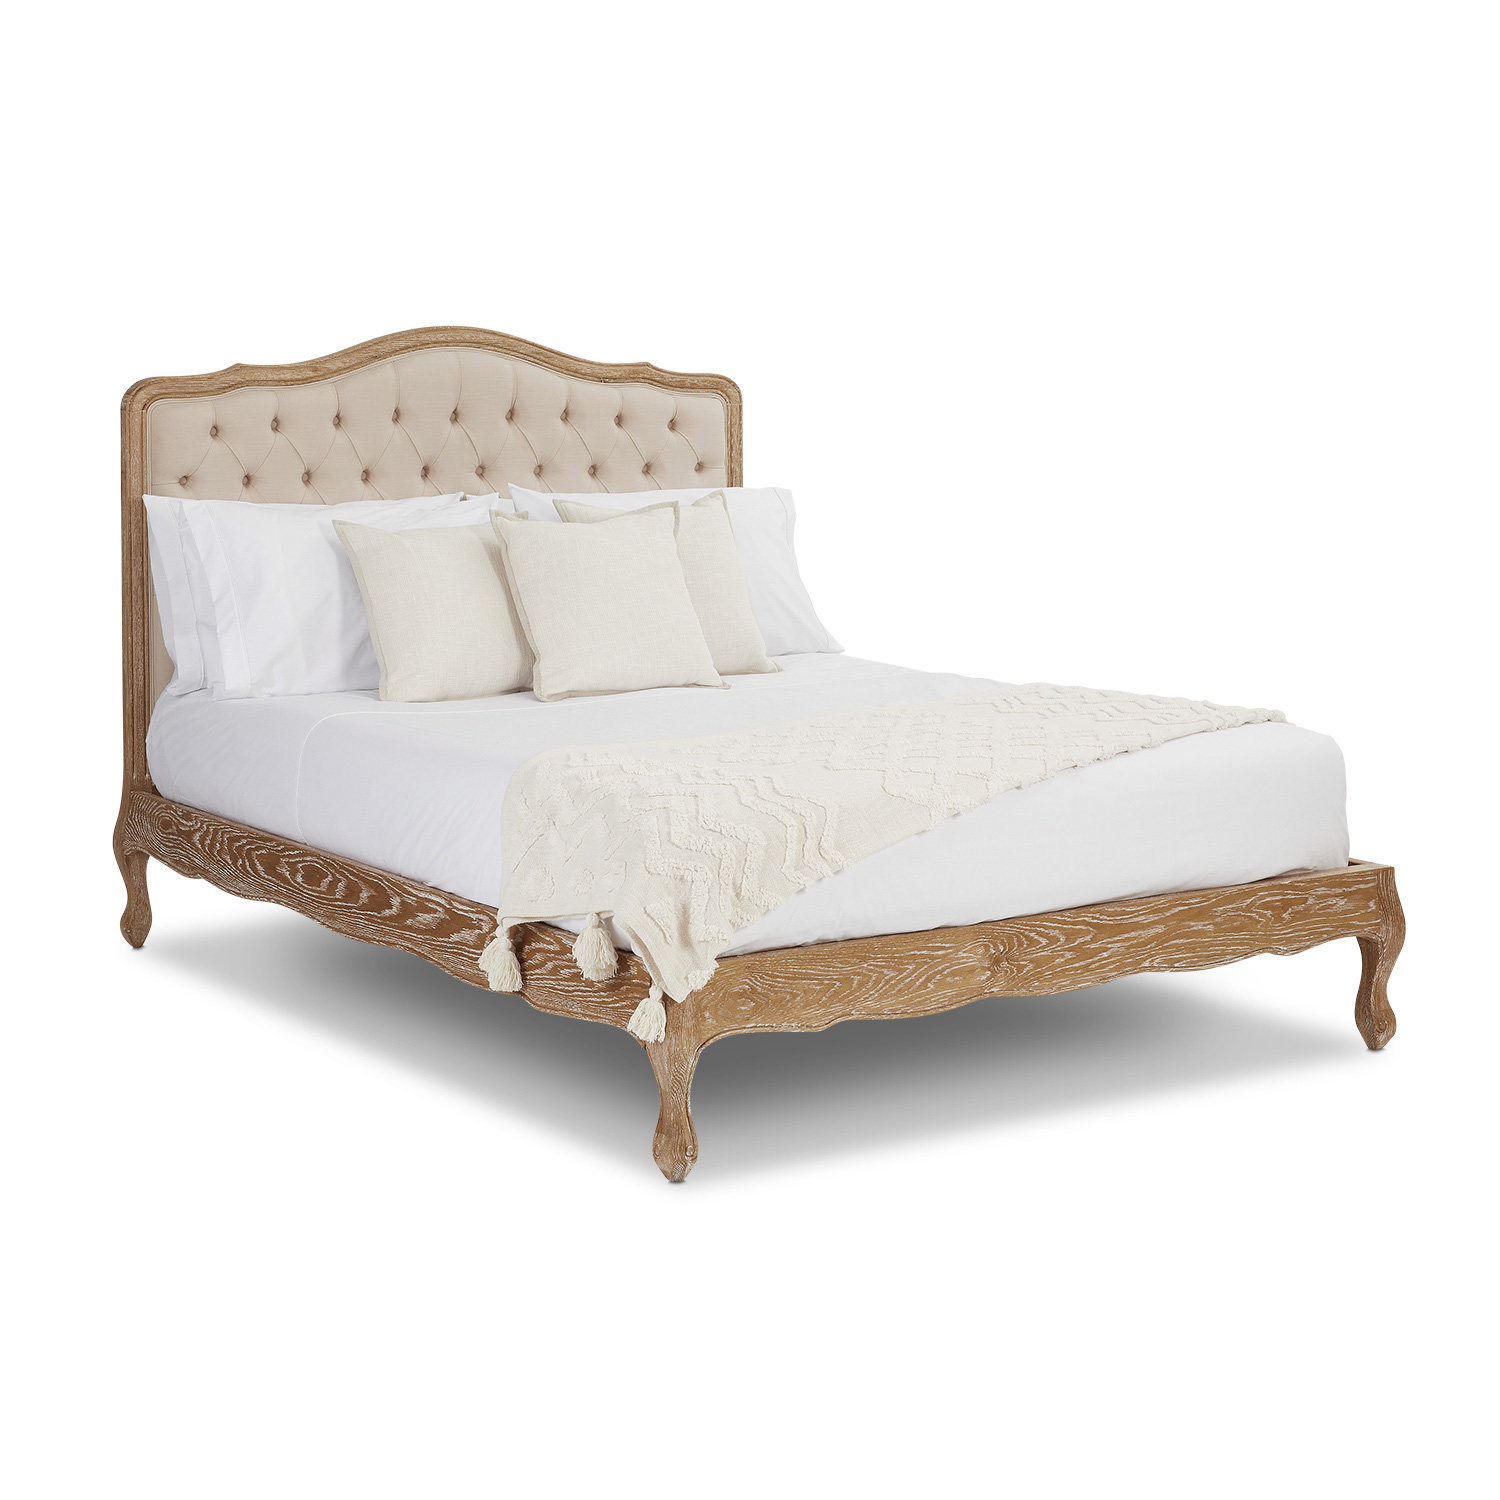 Eléa French Weathered Limed Oak Upholstered Button Back Low Foot Board Bed – King Size